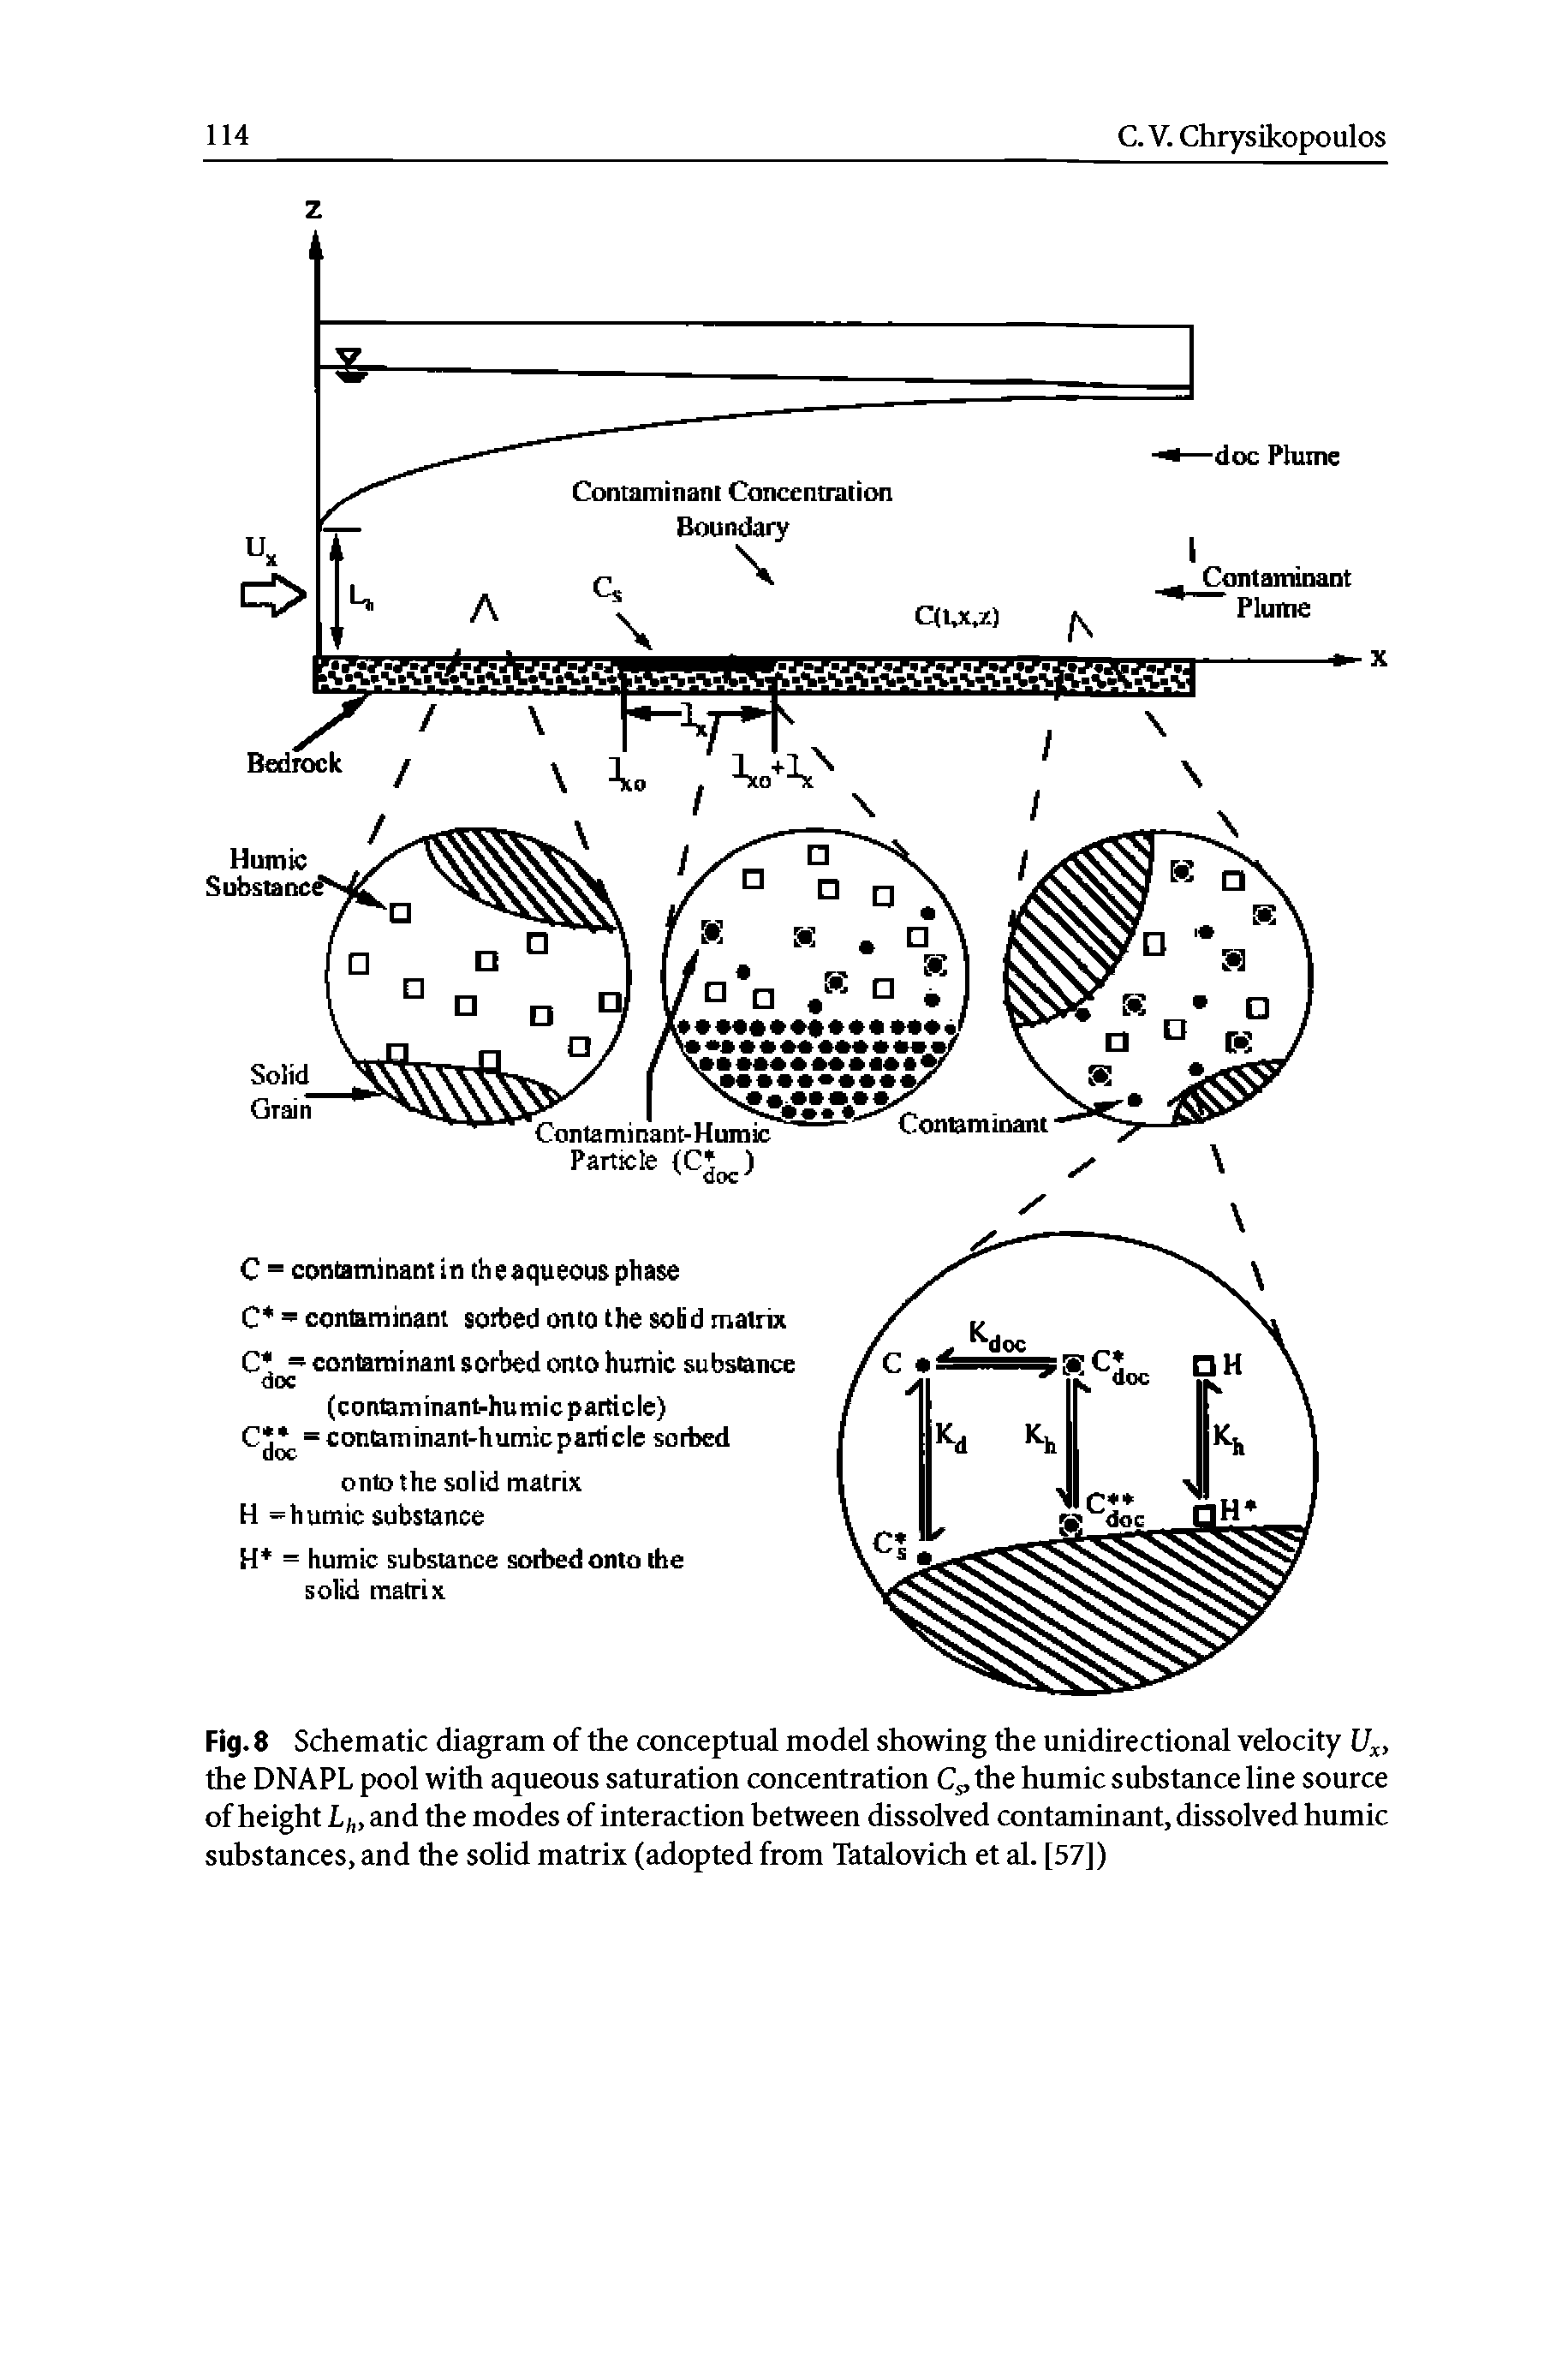 Fig. 8 Schematic diagram of the conceptual model showing the unidirectional velocity Ux, the DNAPL pool with aqueous saturation concentration Cs, the humic substance line source of height Lh> and the modes of interaction between dissolved contaminant, dissolved humic substances, and the solid matrix (adopted from Tatalovich et al. [57])...